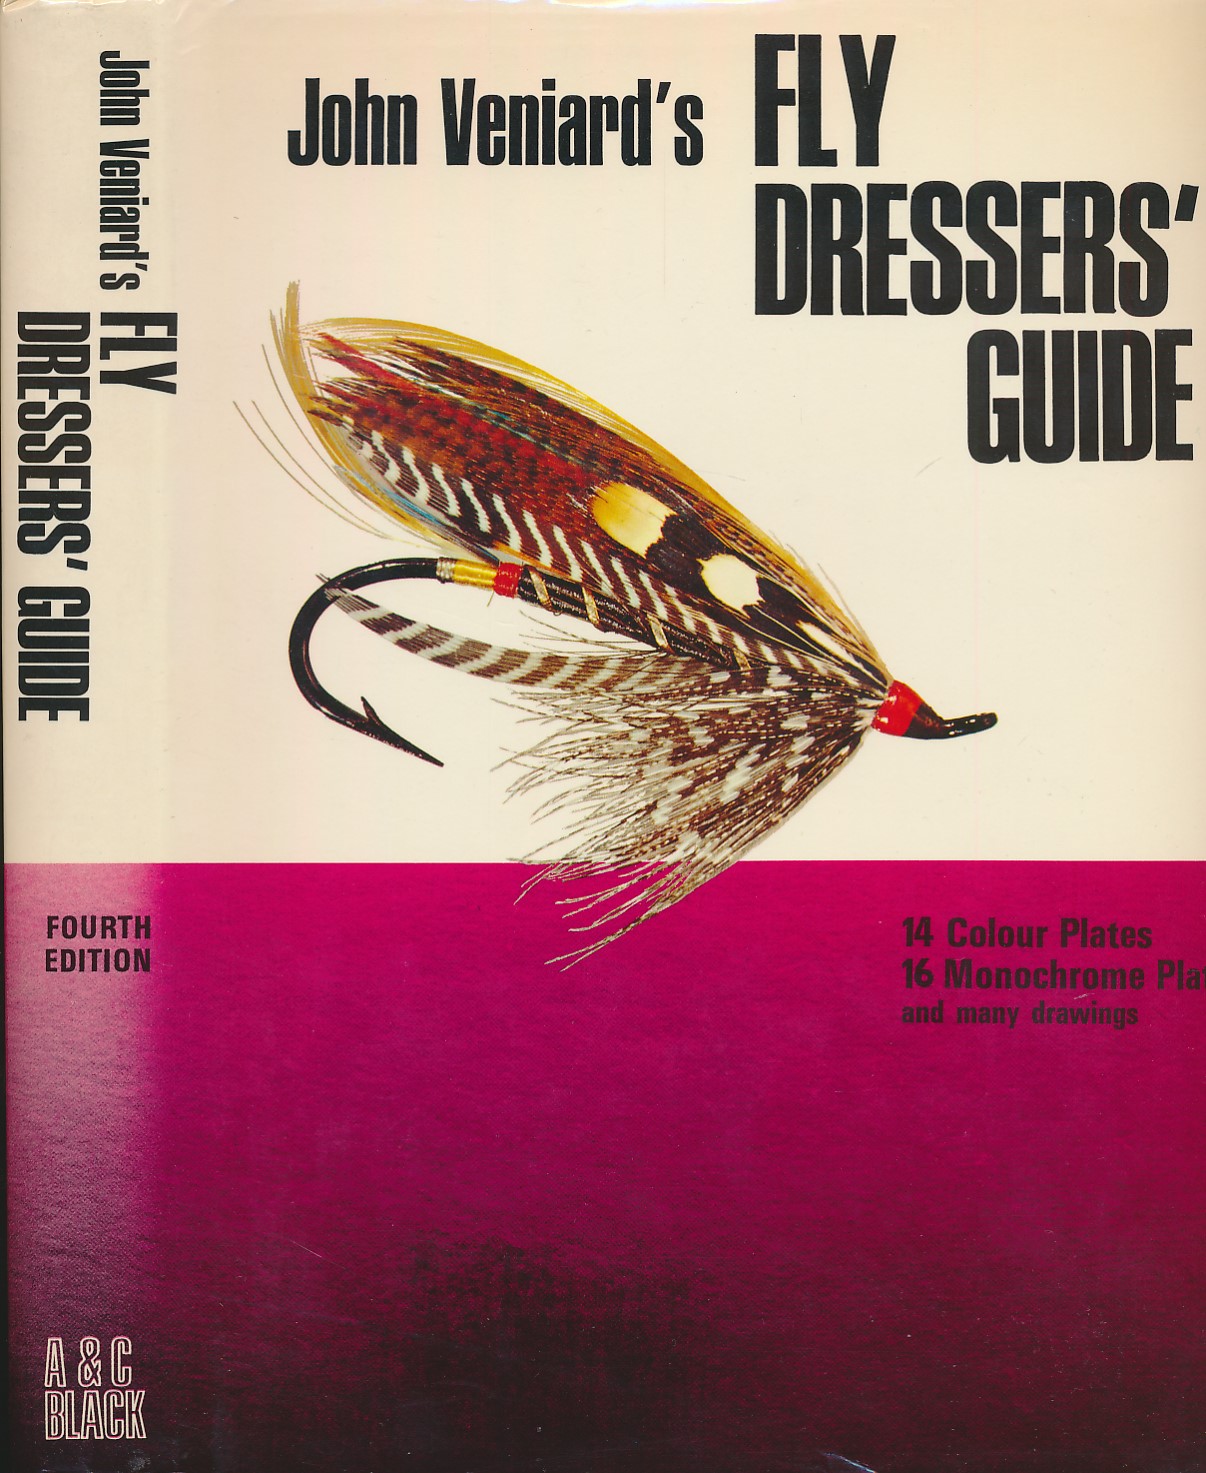 Fly Dressers' Guide. 1977.